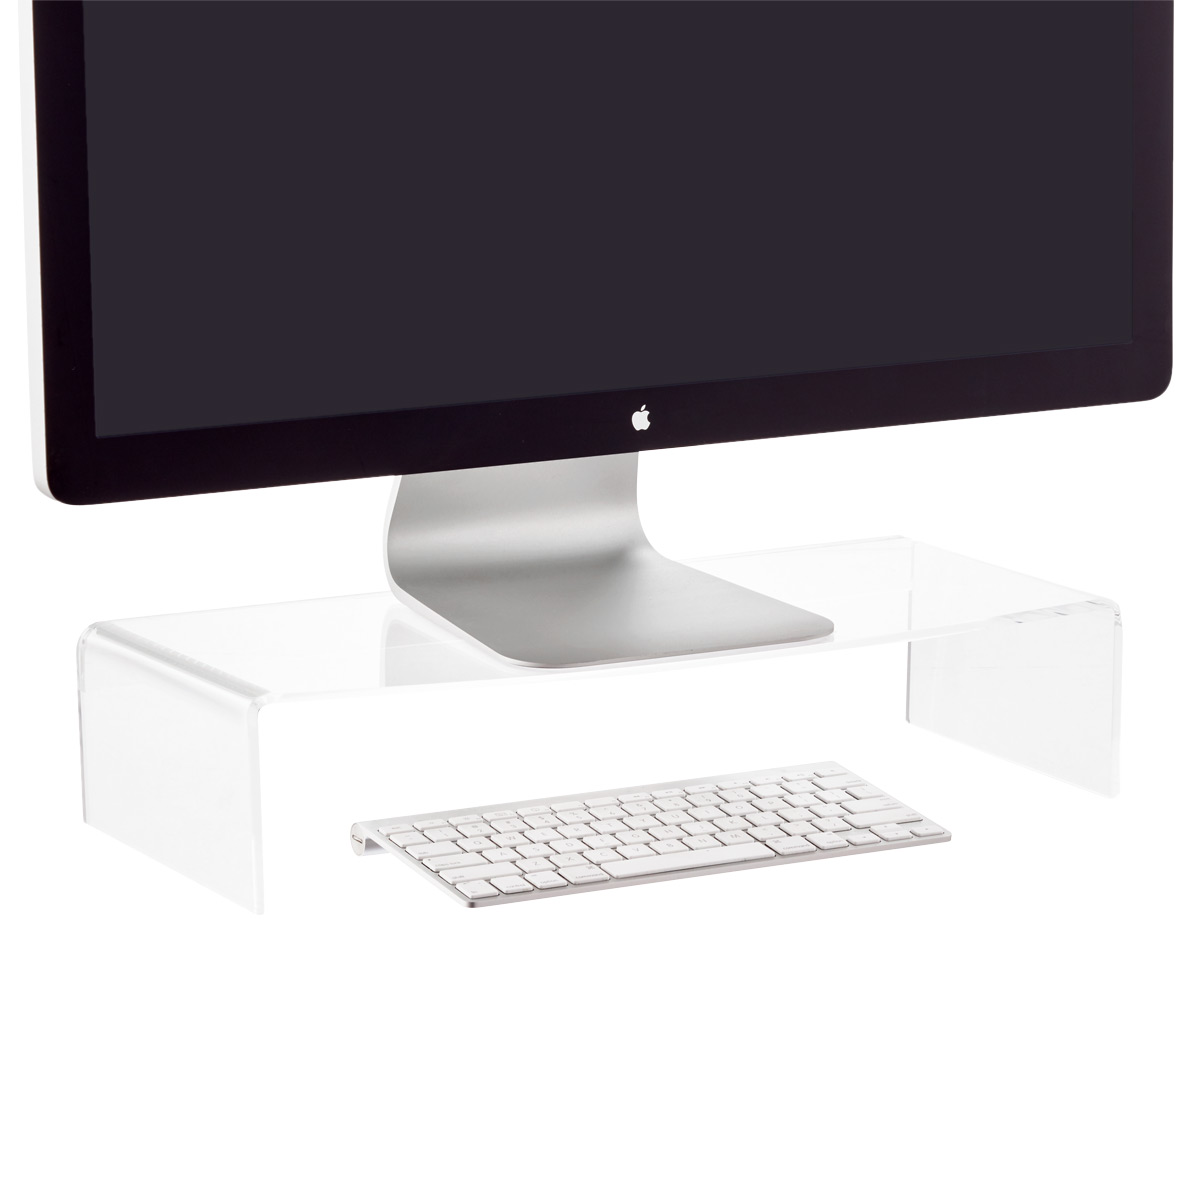 https://www.containerstore.com/catalogimages/306697/10070832-monitor-riser-acrylic-clear.jpg